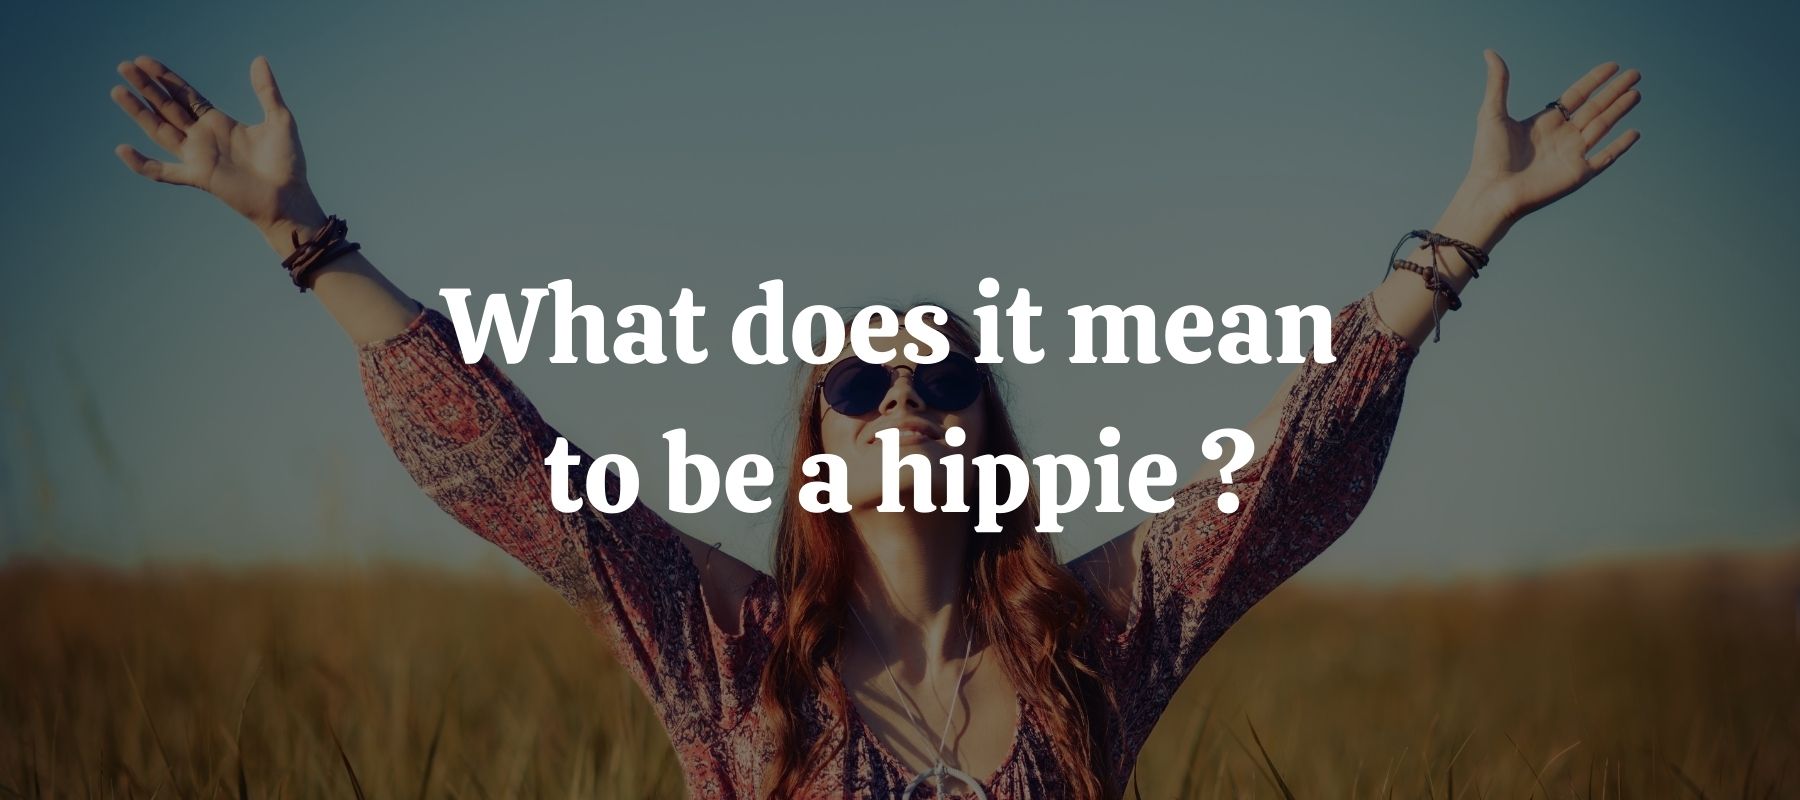 What does it mean to be a hippie